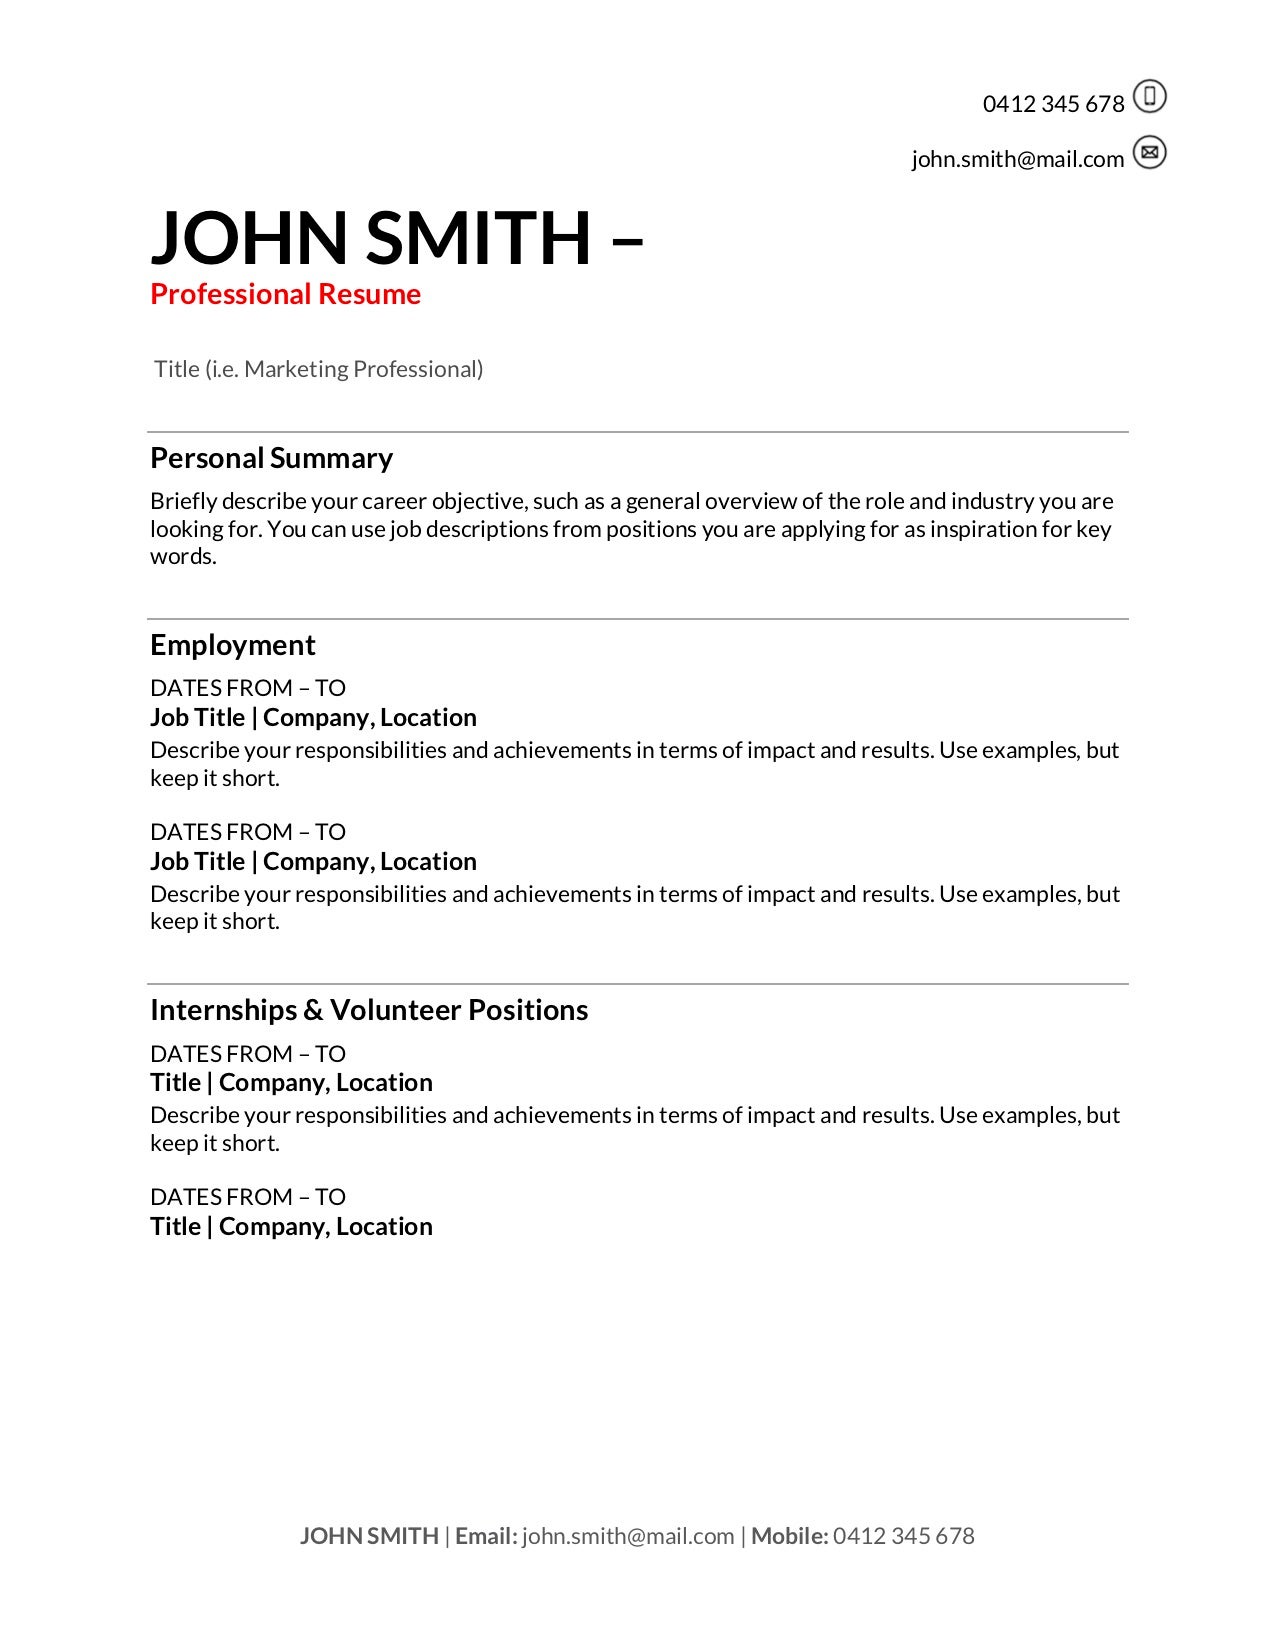 Top Resume Templates from www.training.com.au